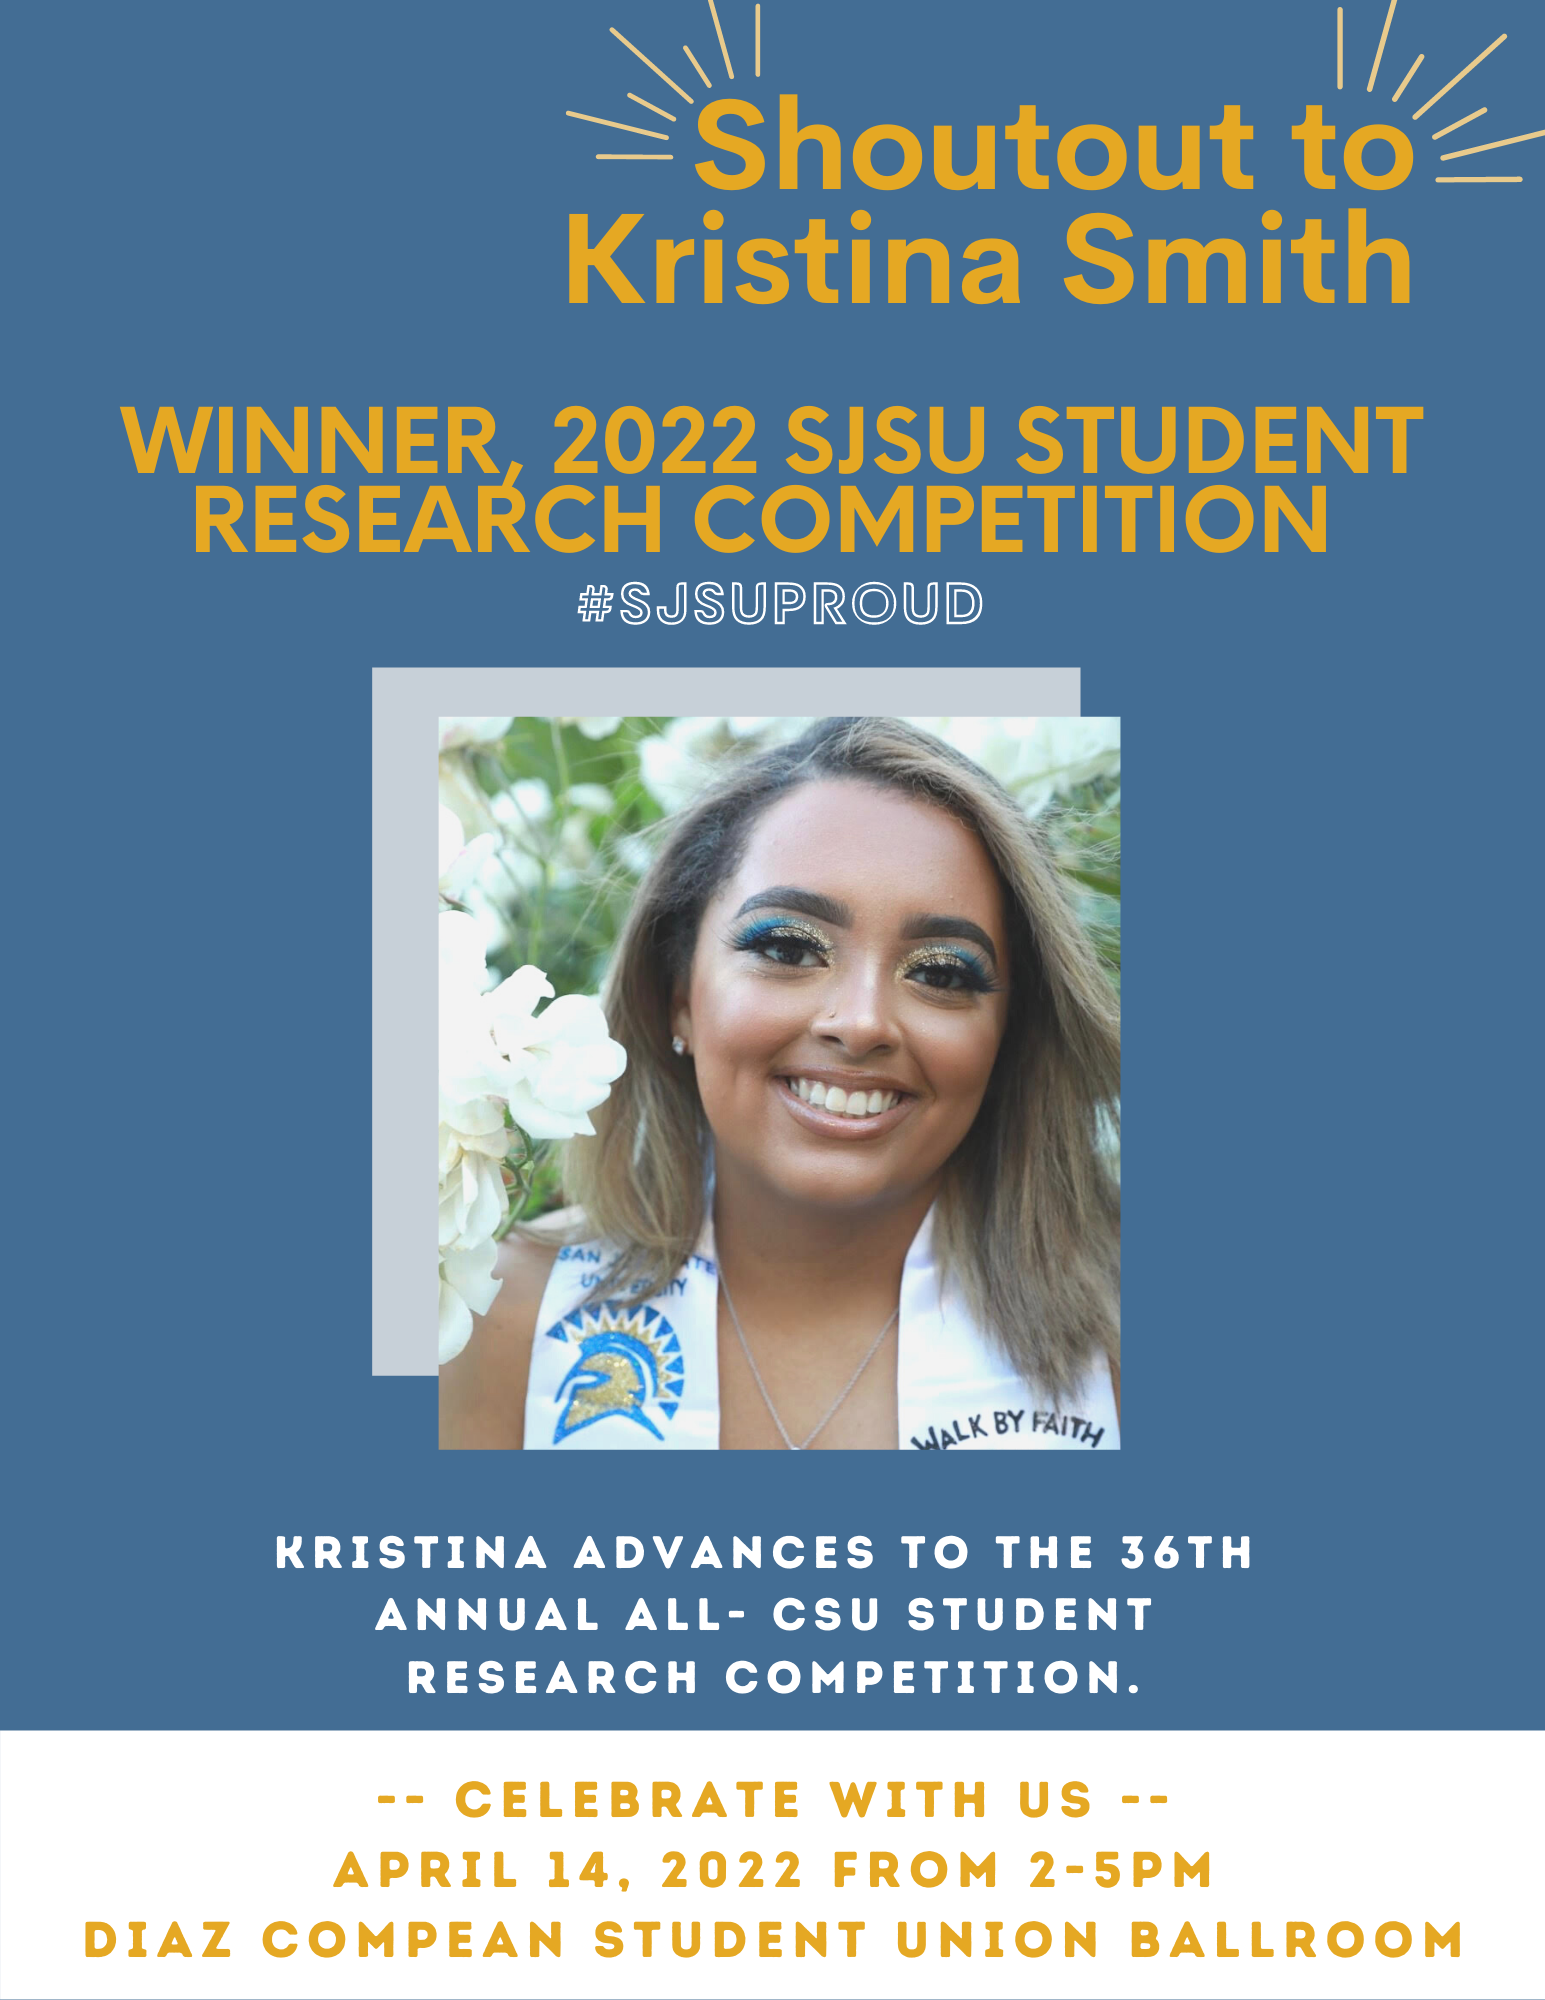 A Shoutout to Kristina Smith, 2022 Student Research Competition Winner